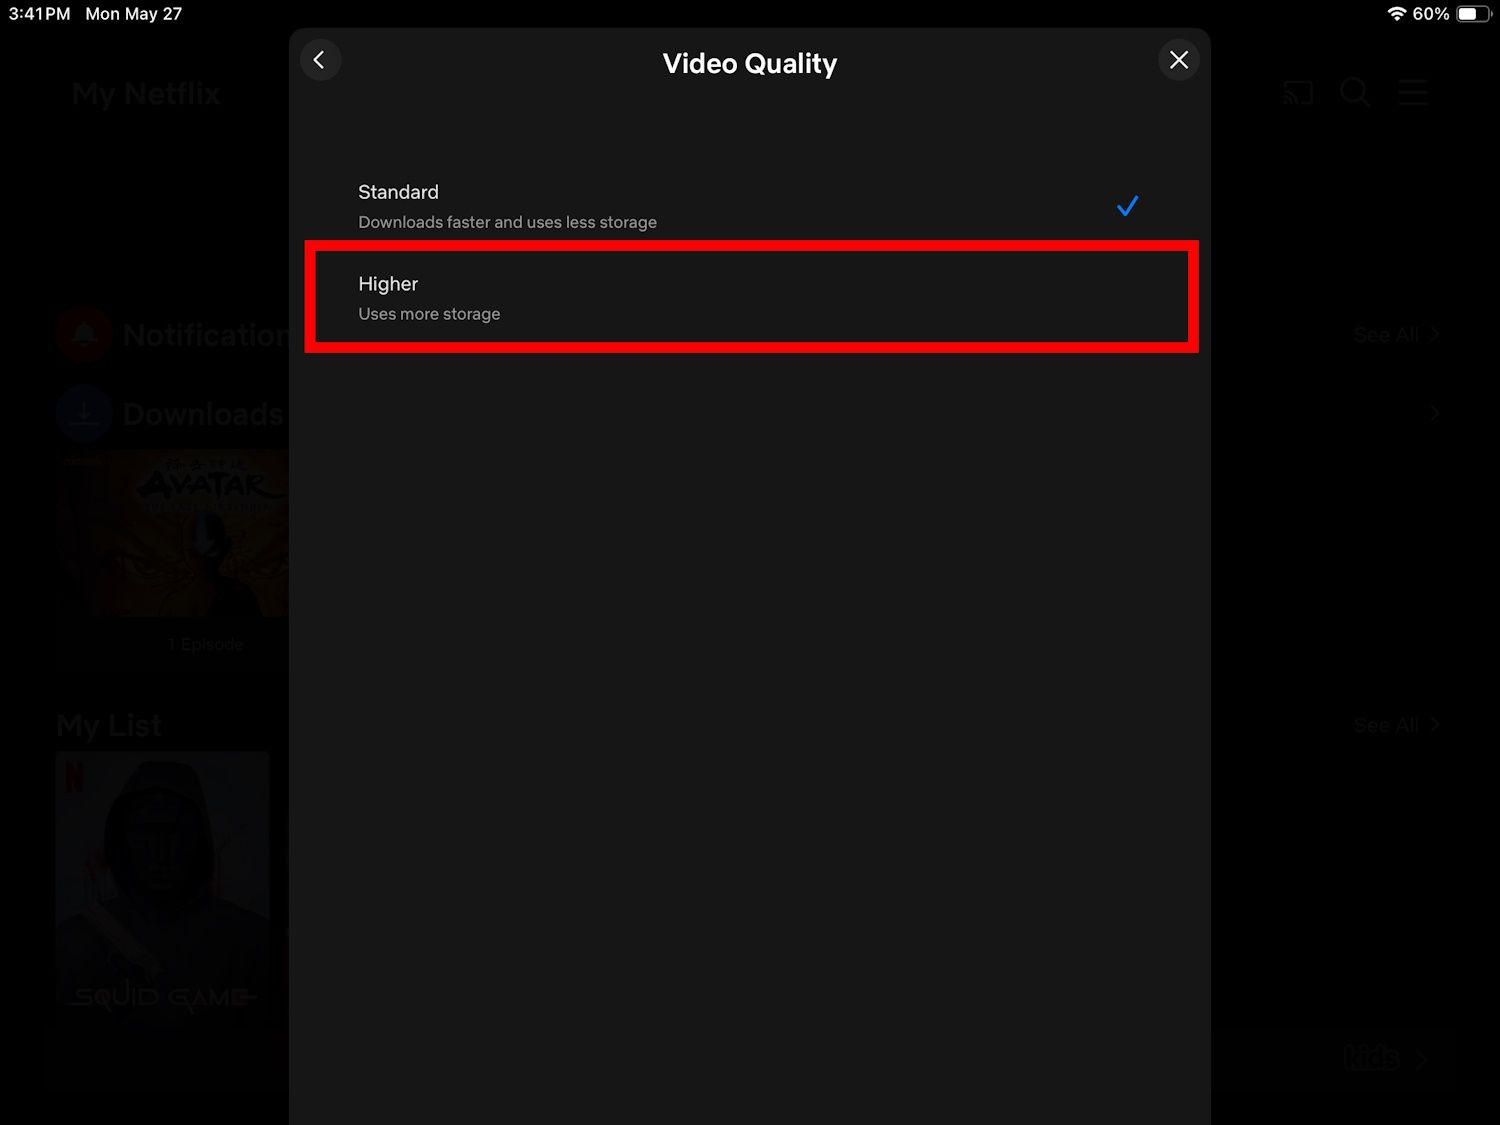 red rectangle outline over higher download video quality option on an ipad